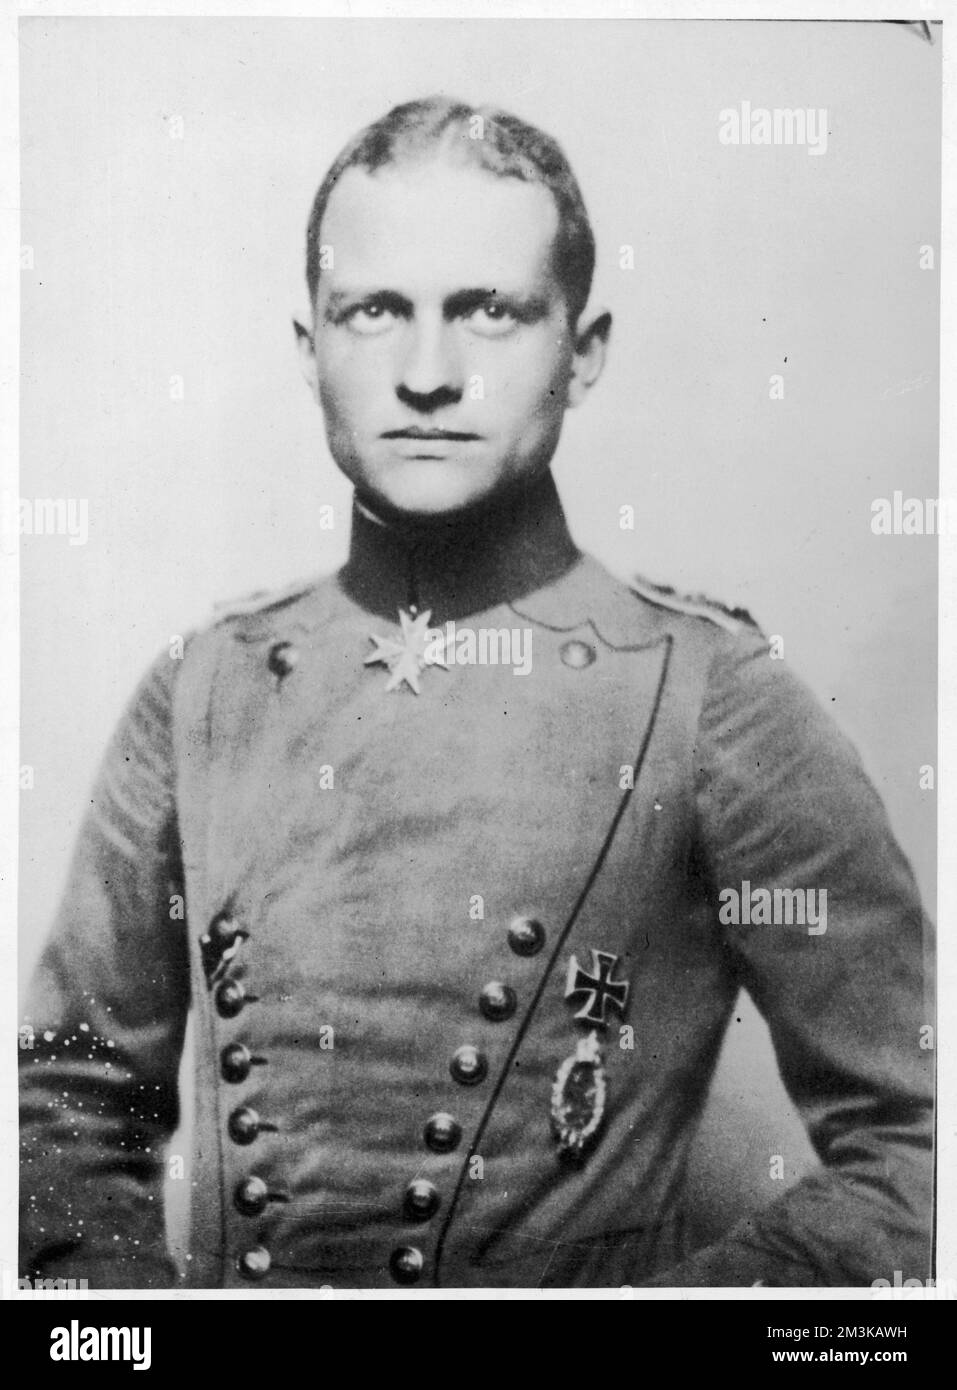 Captain Baron Manfred von Richthofen (1892 - 1918), German aviator and flying ace.  Shot down 80 planes before being killed himself in action in 1918. Known as the Red Baron or Red Knight.     Date: c.1917 Stock Photo